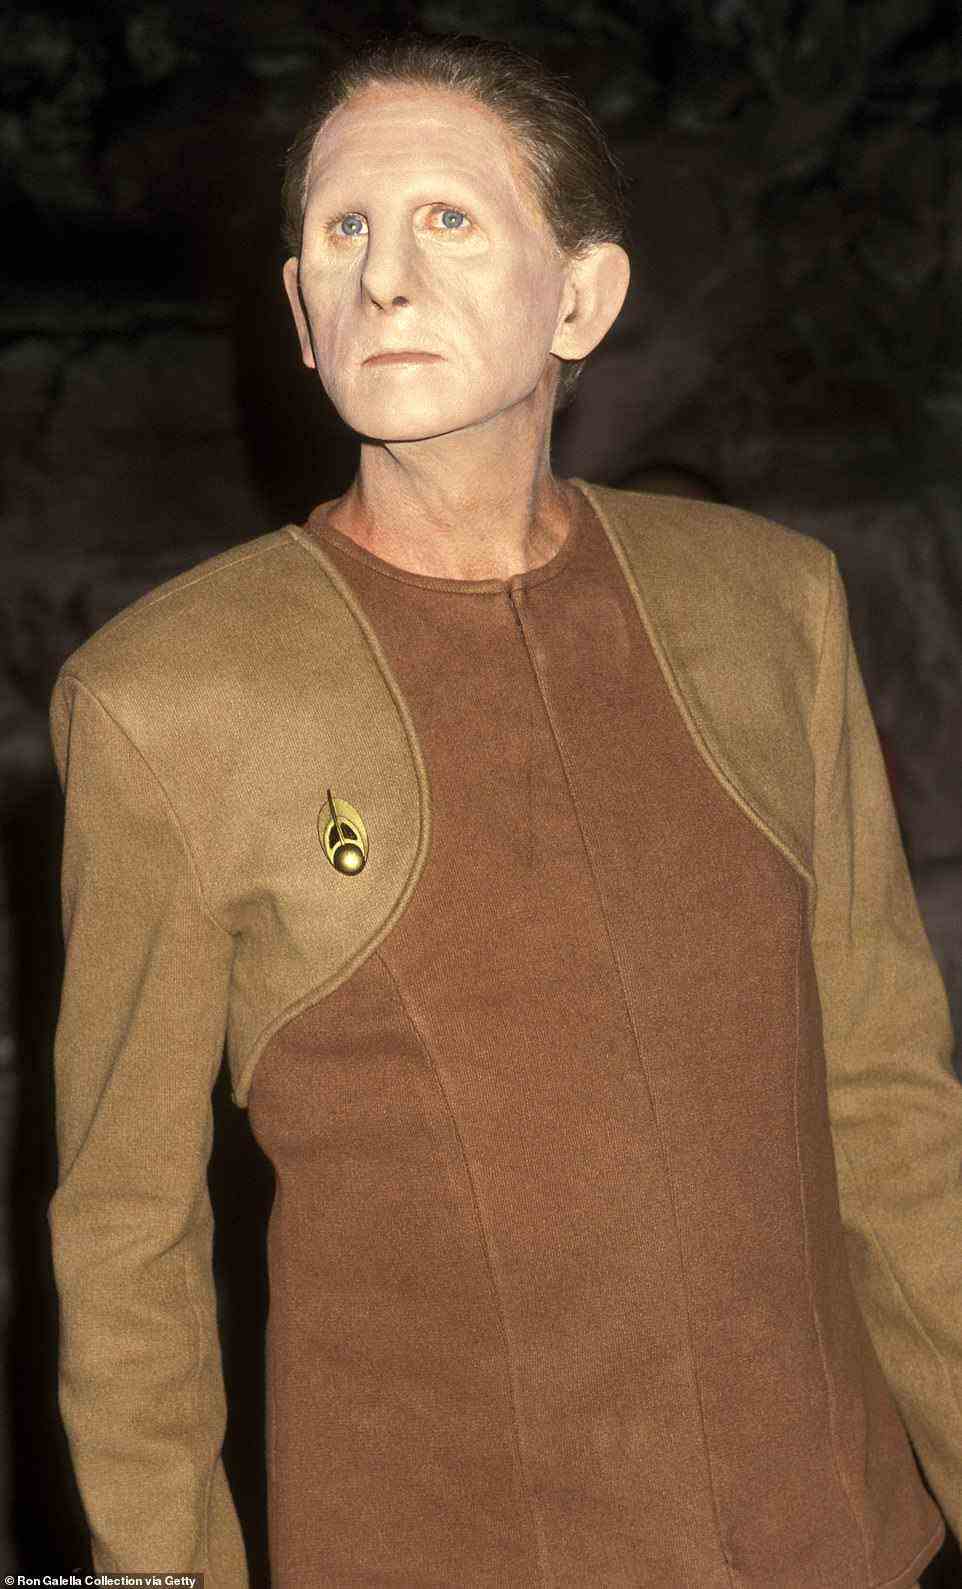 He also famously played Colonel West in the 1991 Star Trek film Star Trek VI: The Undiscovered Country. He is pictured during a Star Trek press conference in 1992